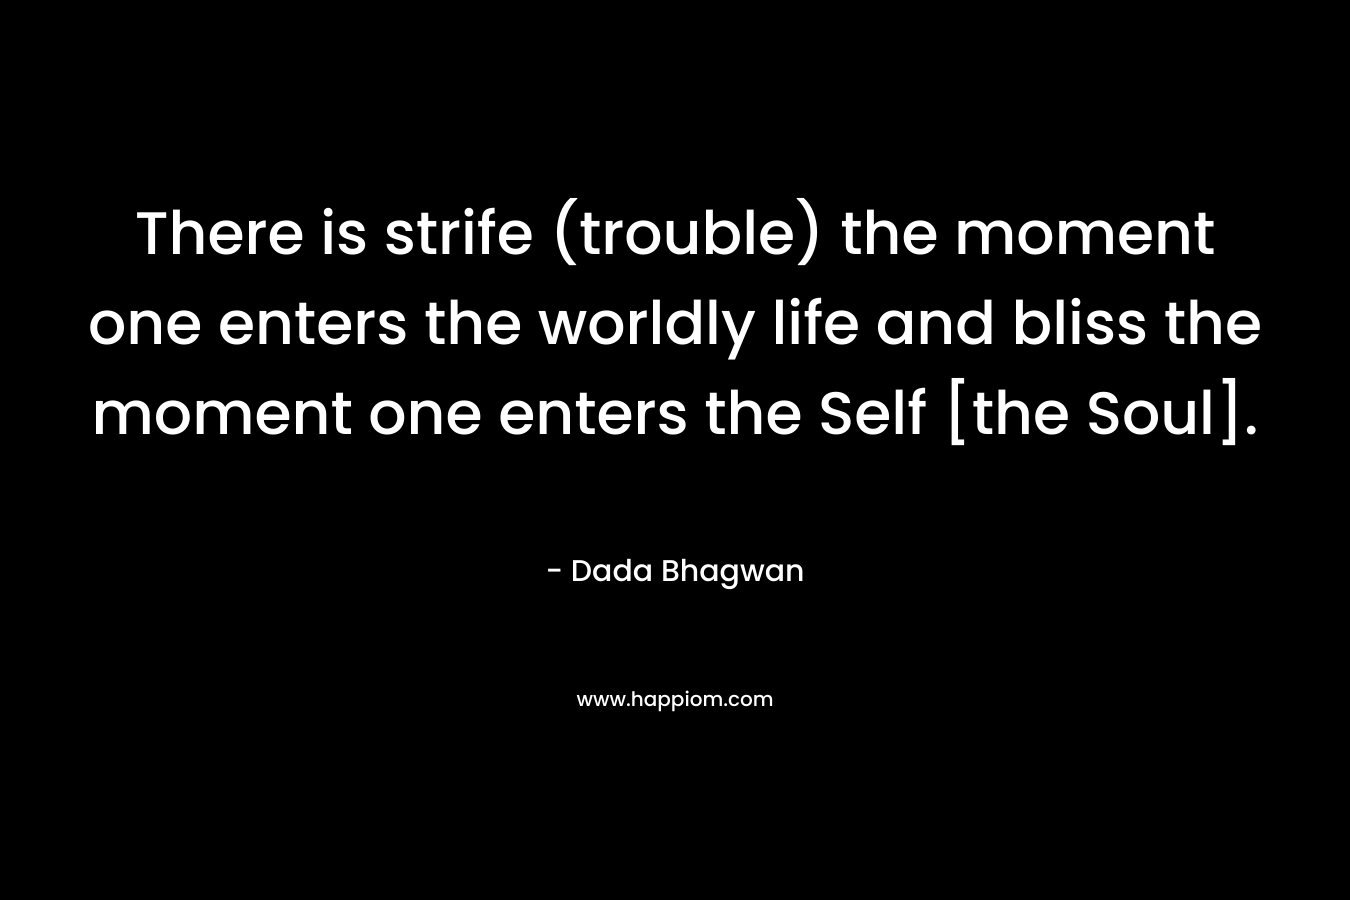 There is strife (trouble) the moment one enters the worldly life and bliss the moment one enters the Self [the Soul].